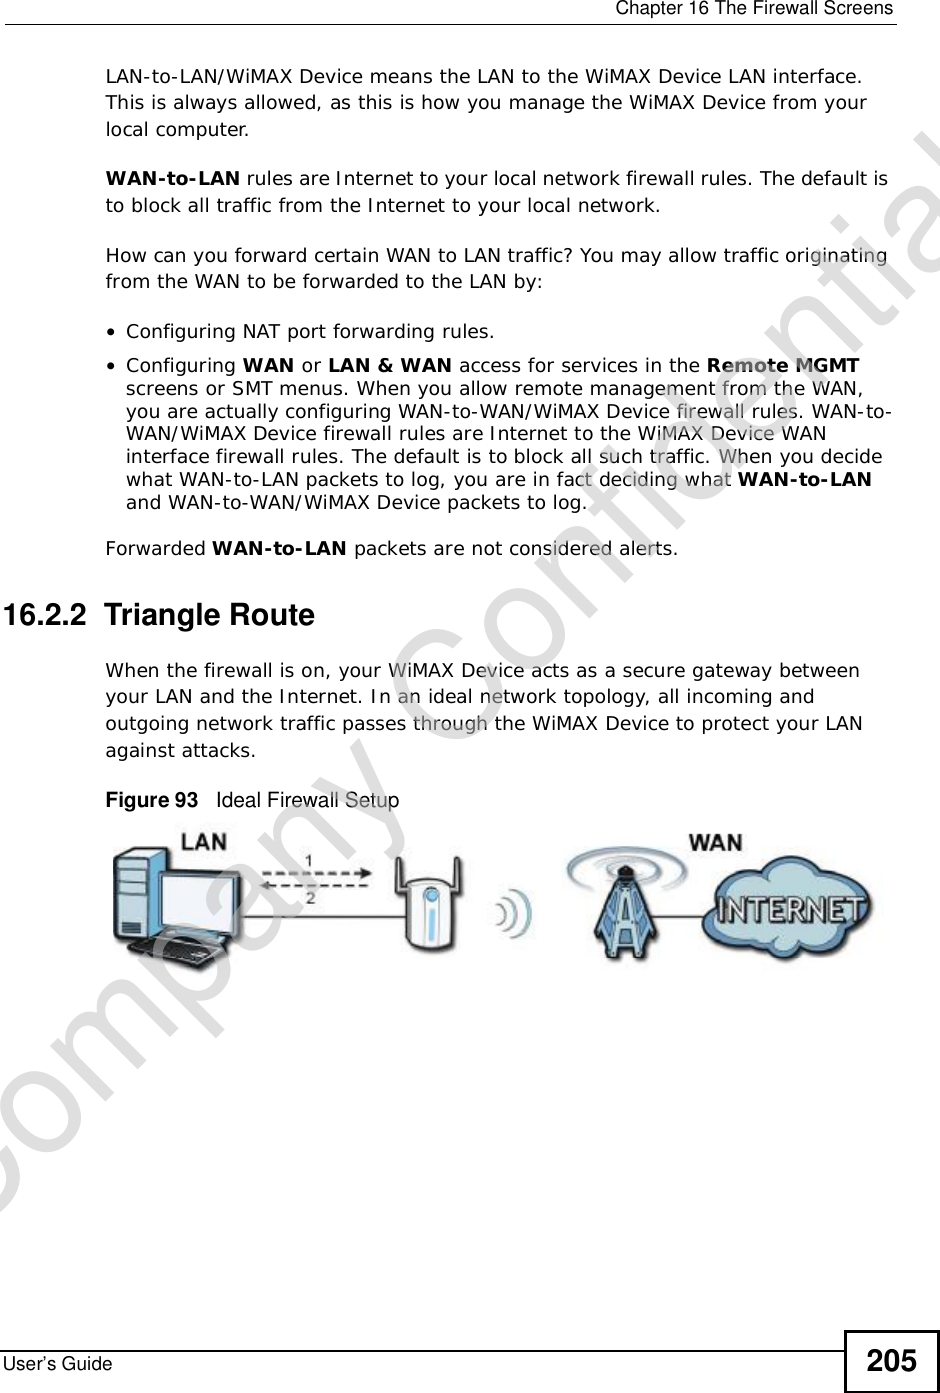  Chapter 16The Firewall ScreensUser’s Guide 205LAN-to-LAN/WiMAX Device means the LAN to the WiMAX Device LAN interface. This is always allowed, as this is how you manage the WiMAX Device from your local computer.WAN-to-LAN rules are Internet to your local network firewall rules. The default is to block all traffic from the Internet to your local network. How can you forward certain WAN to LAN traffic? You may allow traffic originating from the WAN to be forwarded to the LAN by:•Configuring NAT port forwarding rules.•Configuring WAN or LAN &amp; WAN access for services in the Remote MGMTscreens or SMT menus. When you allow remote management from the WAN, you are actually configuring WAN-to-WAN/WiMAX Device firewall rules. WAN-to-WAN/WiMAX Device firewall rules are Internet to the WiMAX Device WAN interface firewall rules. The default is to block all such traffic. When you decide what WAN-to-LAN packets to log, you are in fact deciding what WAN-to-LANand WAN-to-WAN/WiMAX Device packets to log. Forwarded WAN-to-LAN packets are not considered alerts.16.2.2  Triangle RouteWhen the firewall is on, your WiMAX Device acts as a secure gateway between your LAN and the Internet. In an ideal network topology, all incoming and outgoing network traffic passes through the WiMAX Device to protect your LAN against attacks.Figure 93   Ideal Firewall SetupCompany Confidential